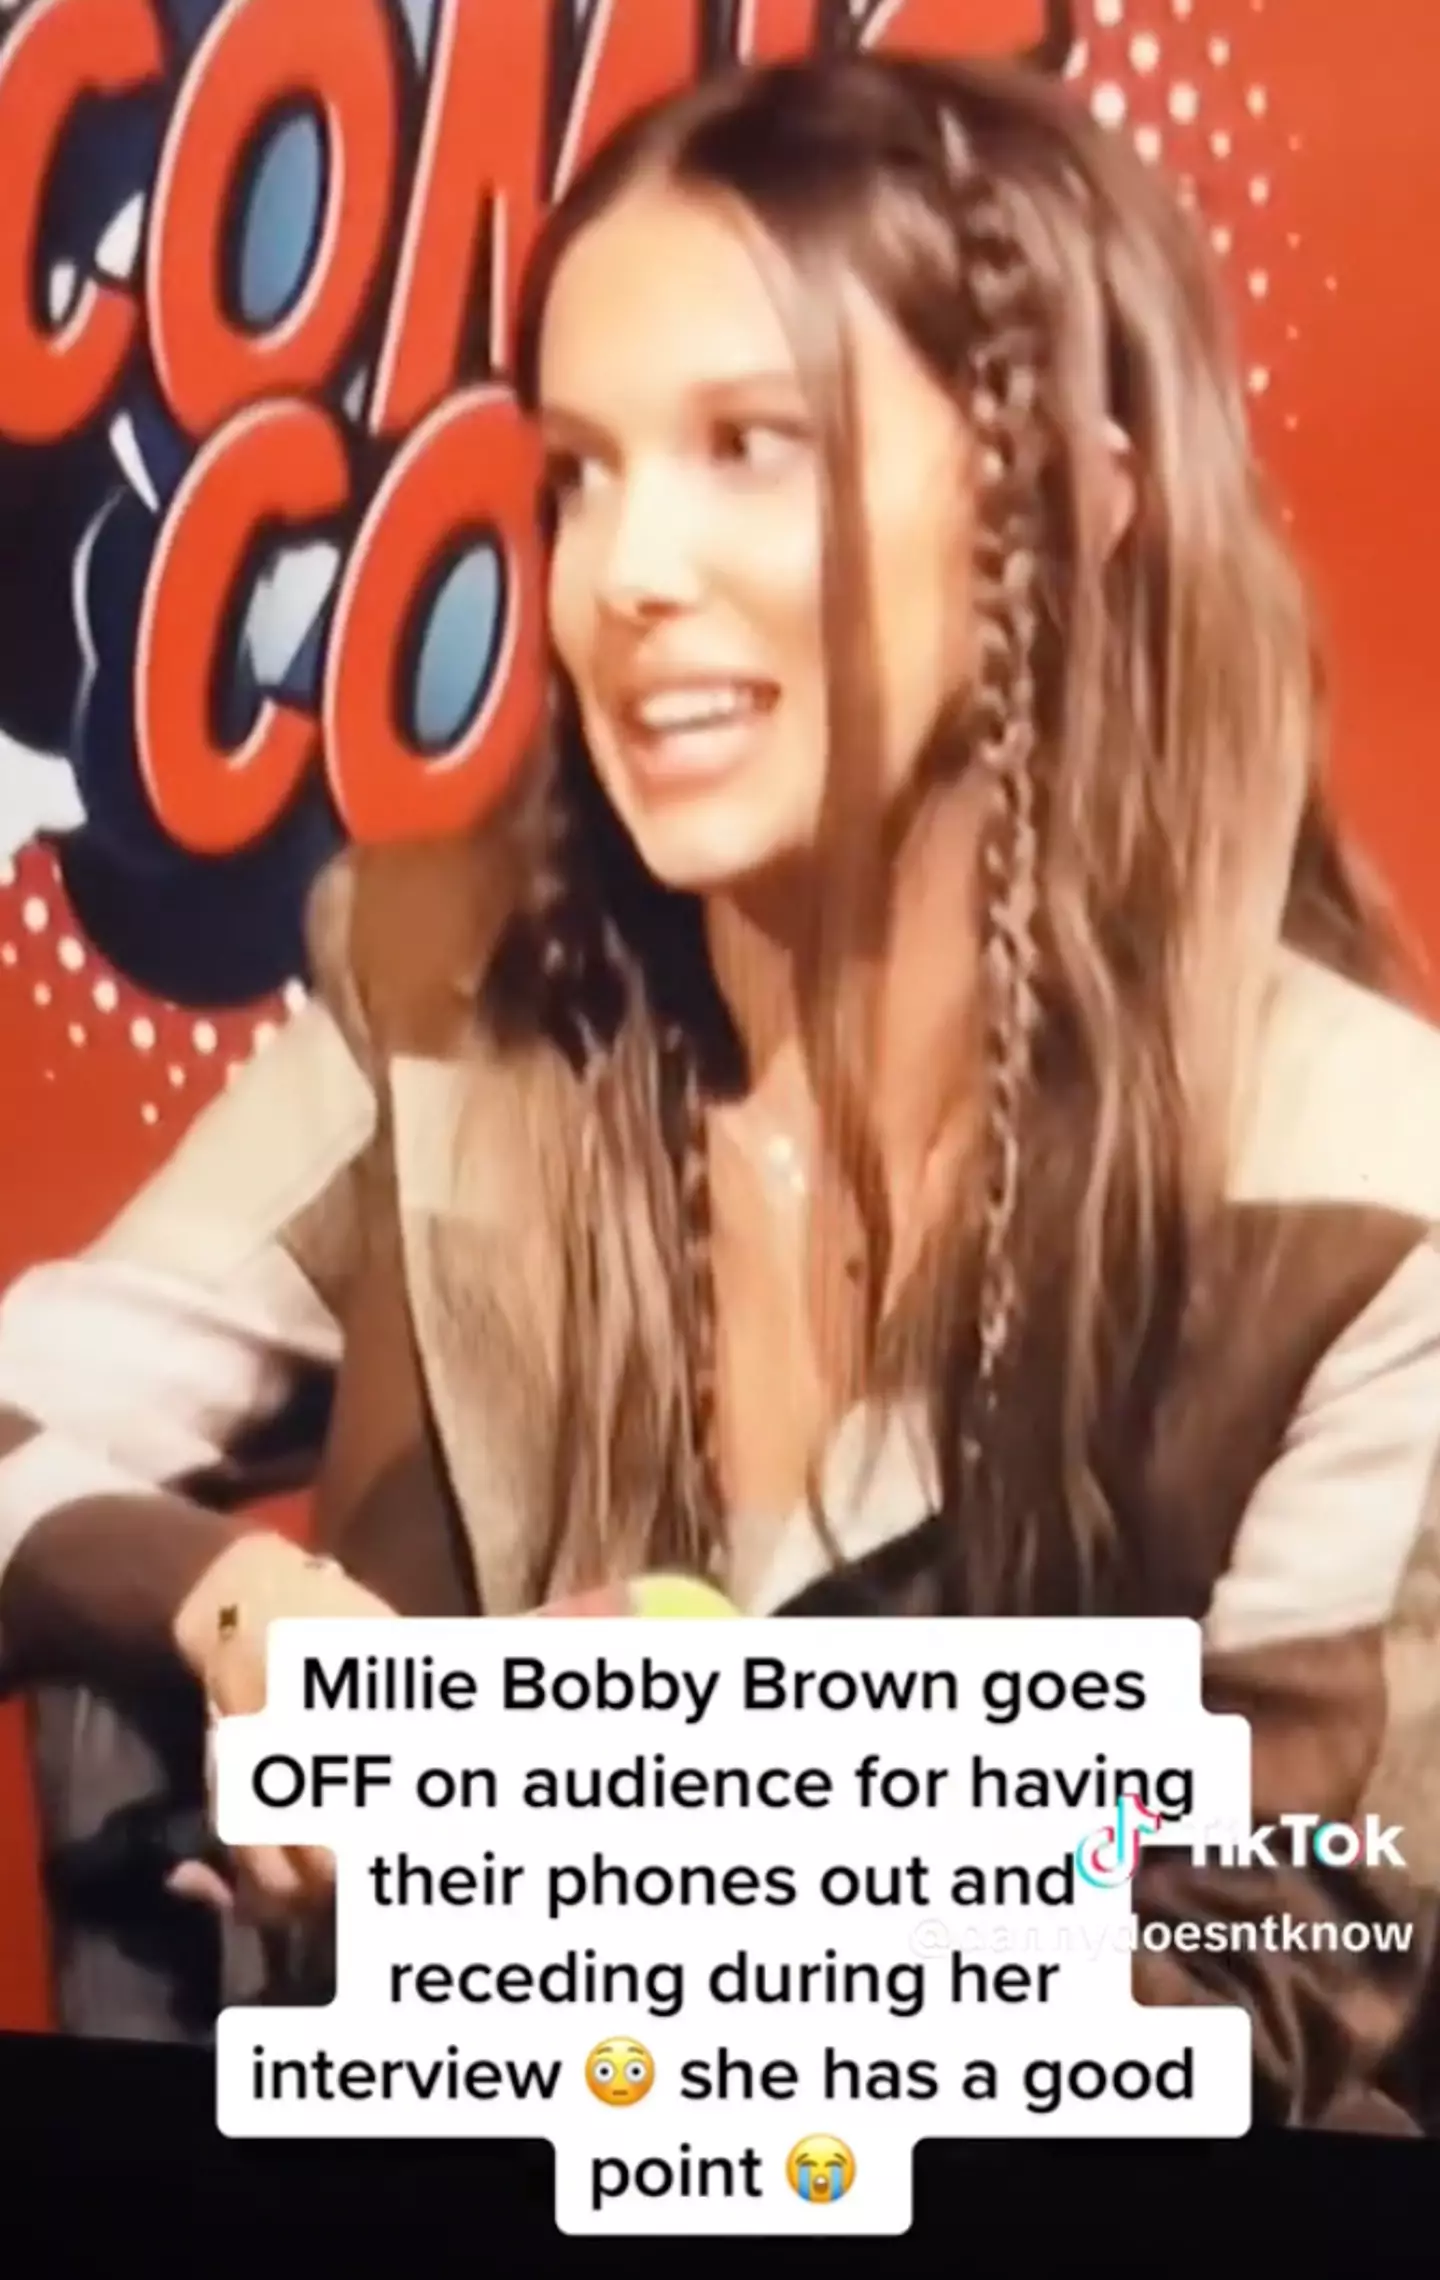 Bobby Brown has been criticised for her comment.